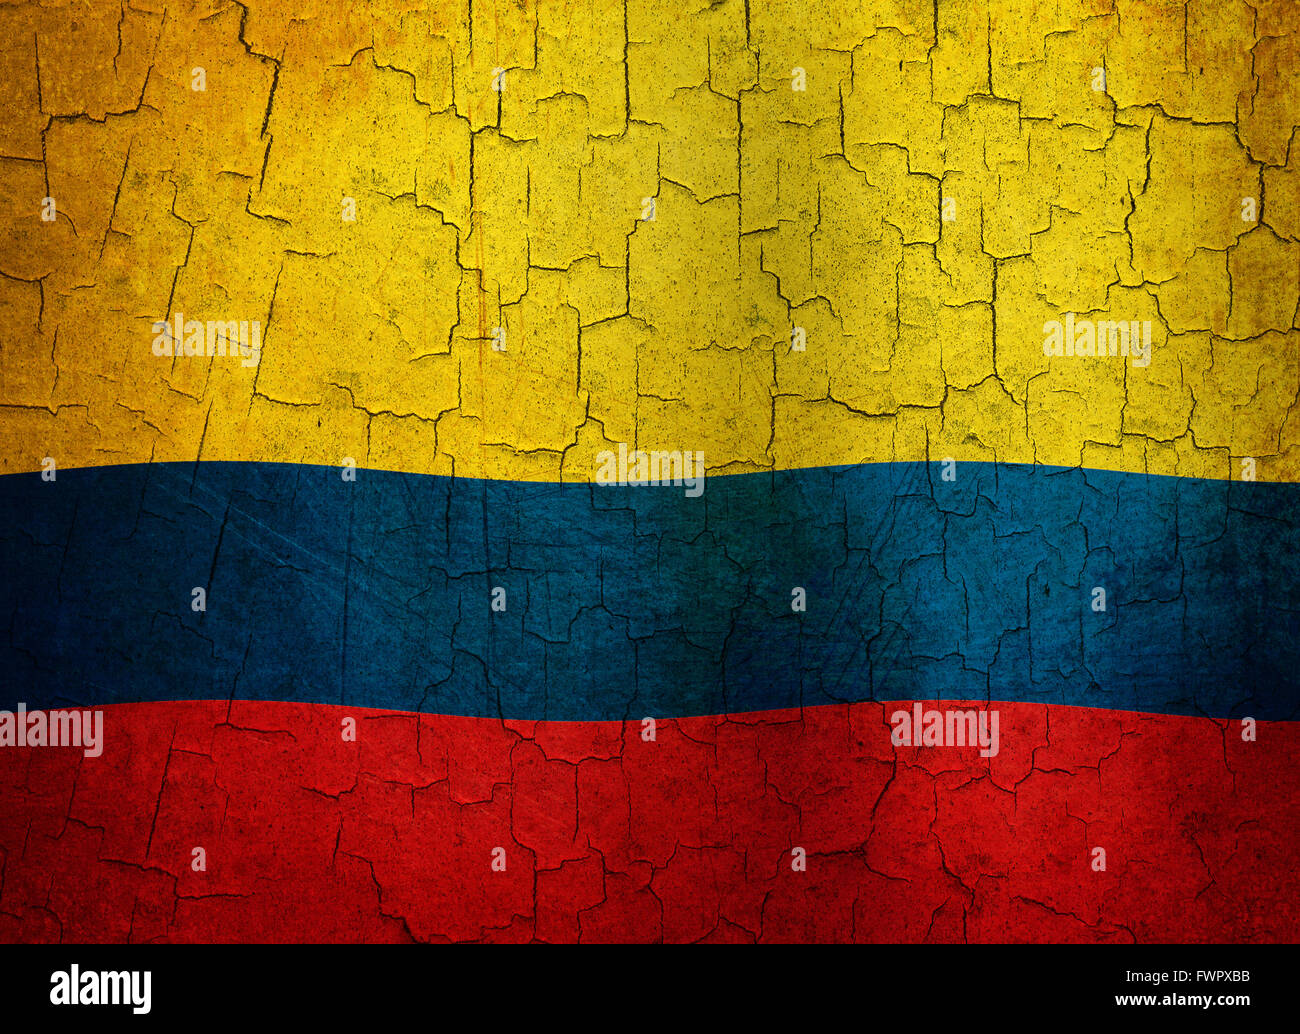 Colombia flag on an old cracked wall Stock Photo